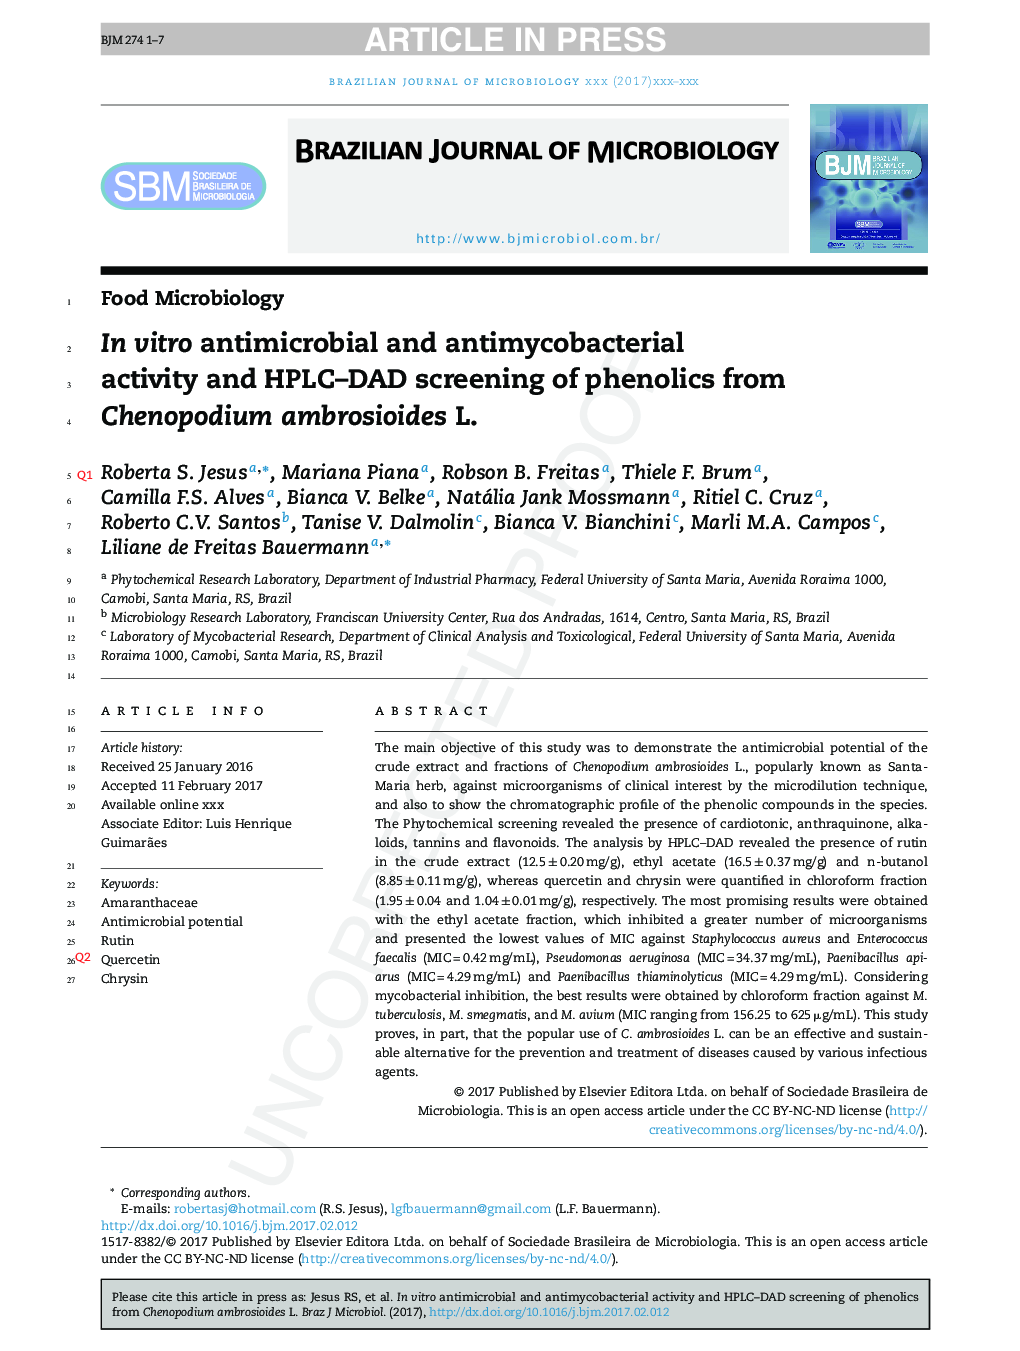 In vitro antimicrobial and antimycobacterial activity and HPLC-DAD screening of phenolics from Chenopodium ambrosioides L.